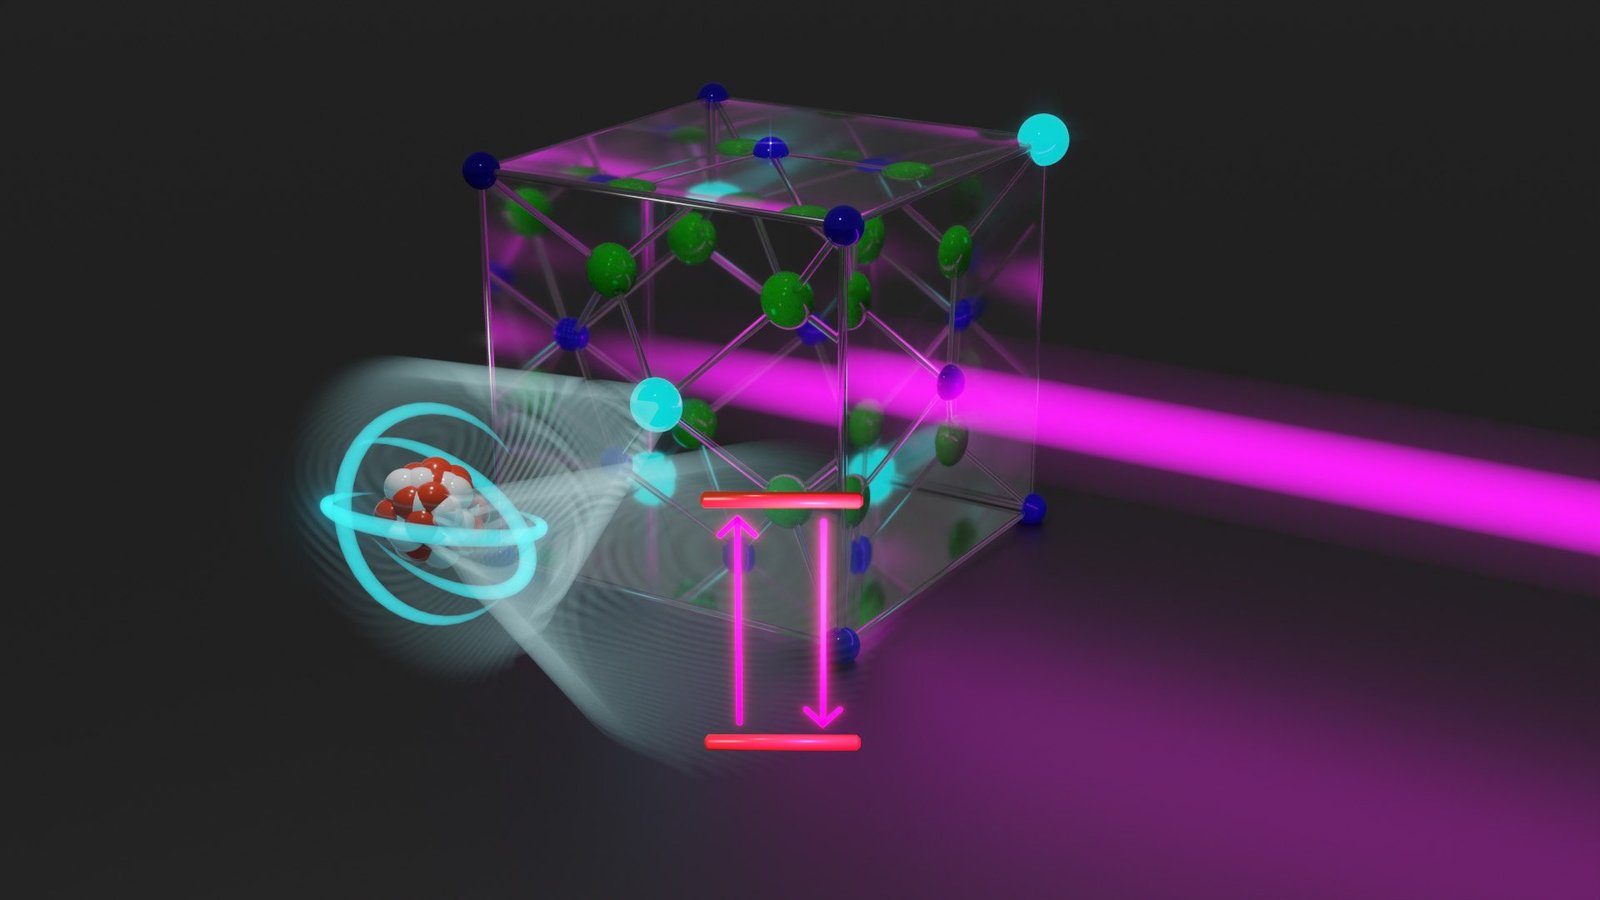 Laser Excites Atomic Nucleus in Groundbreaking Discovery